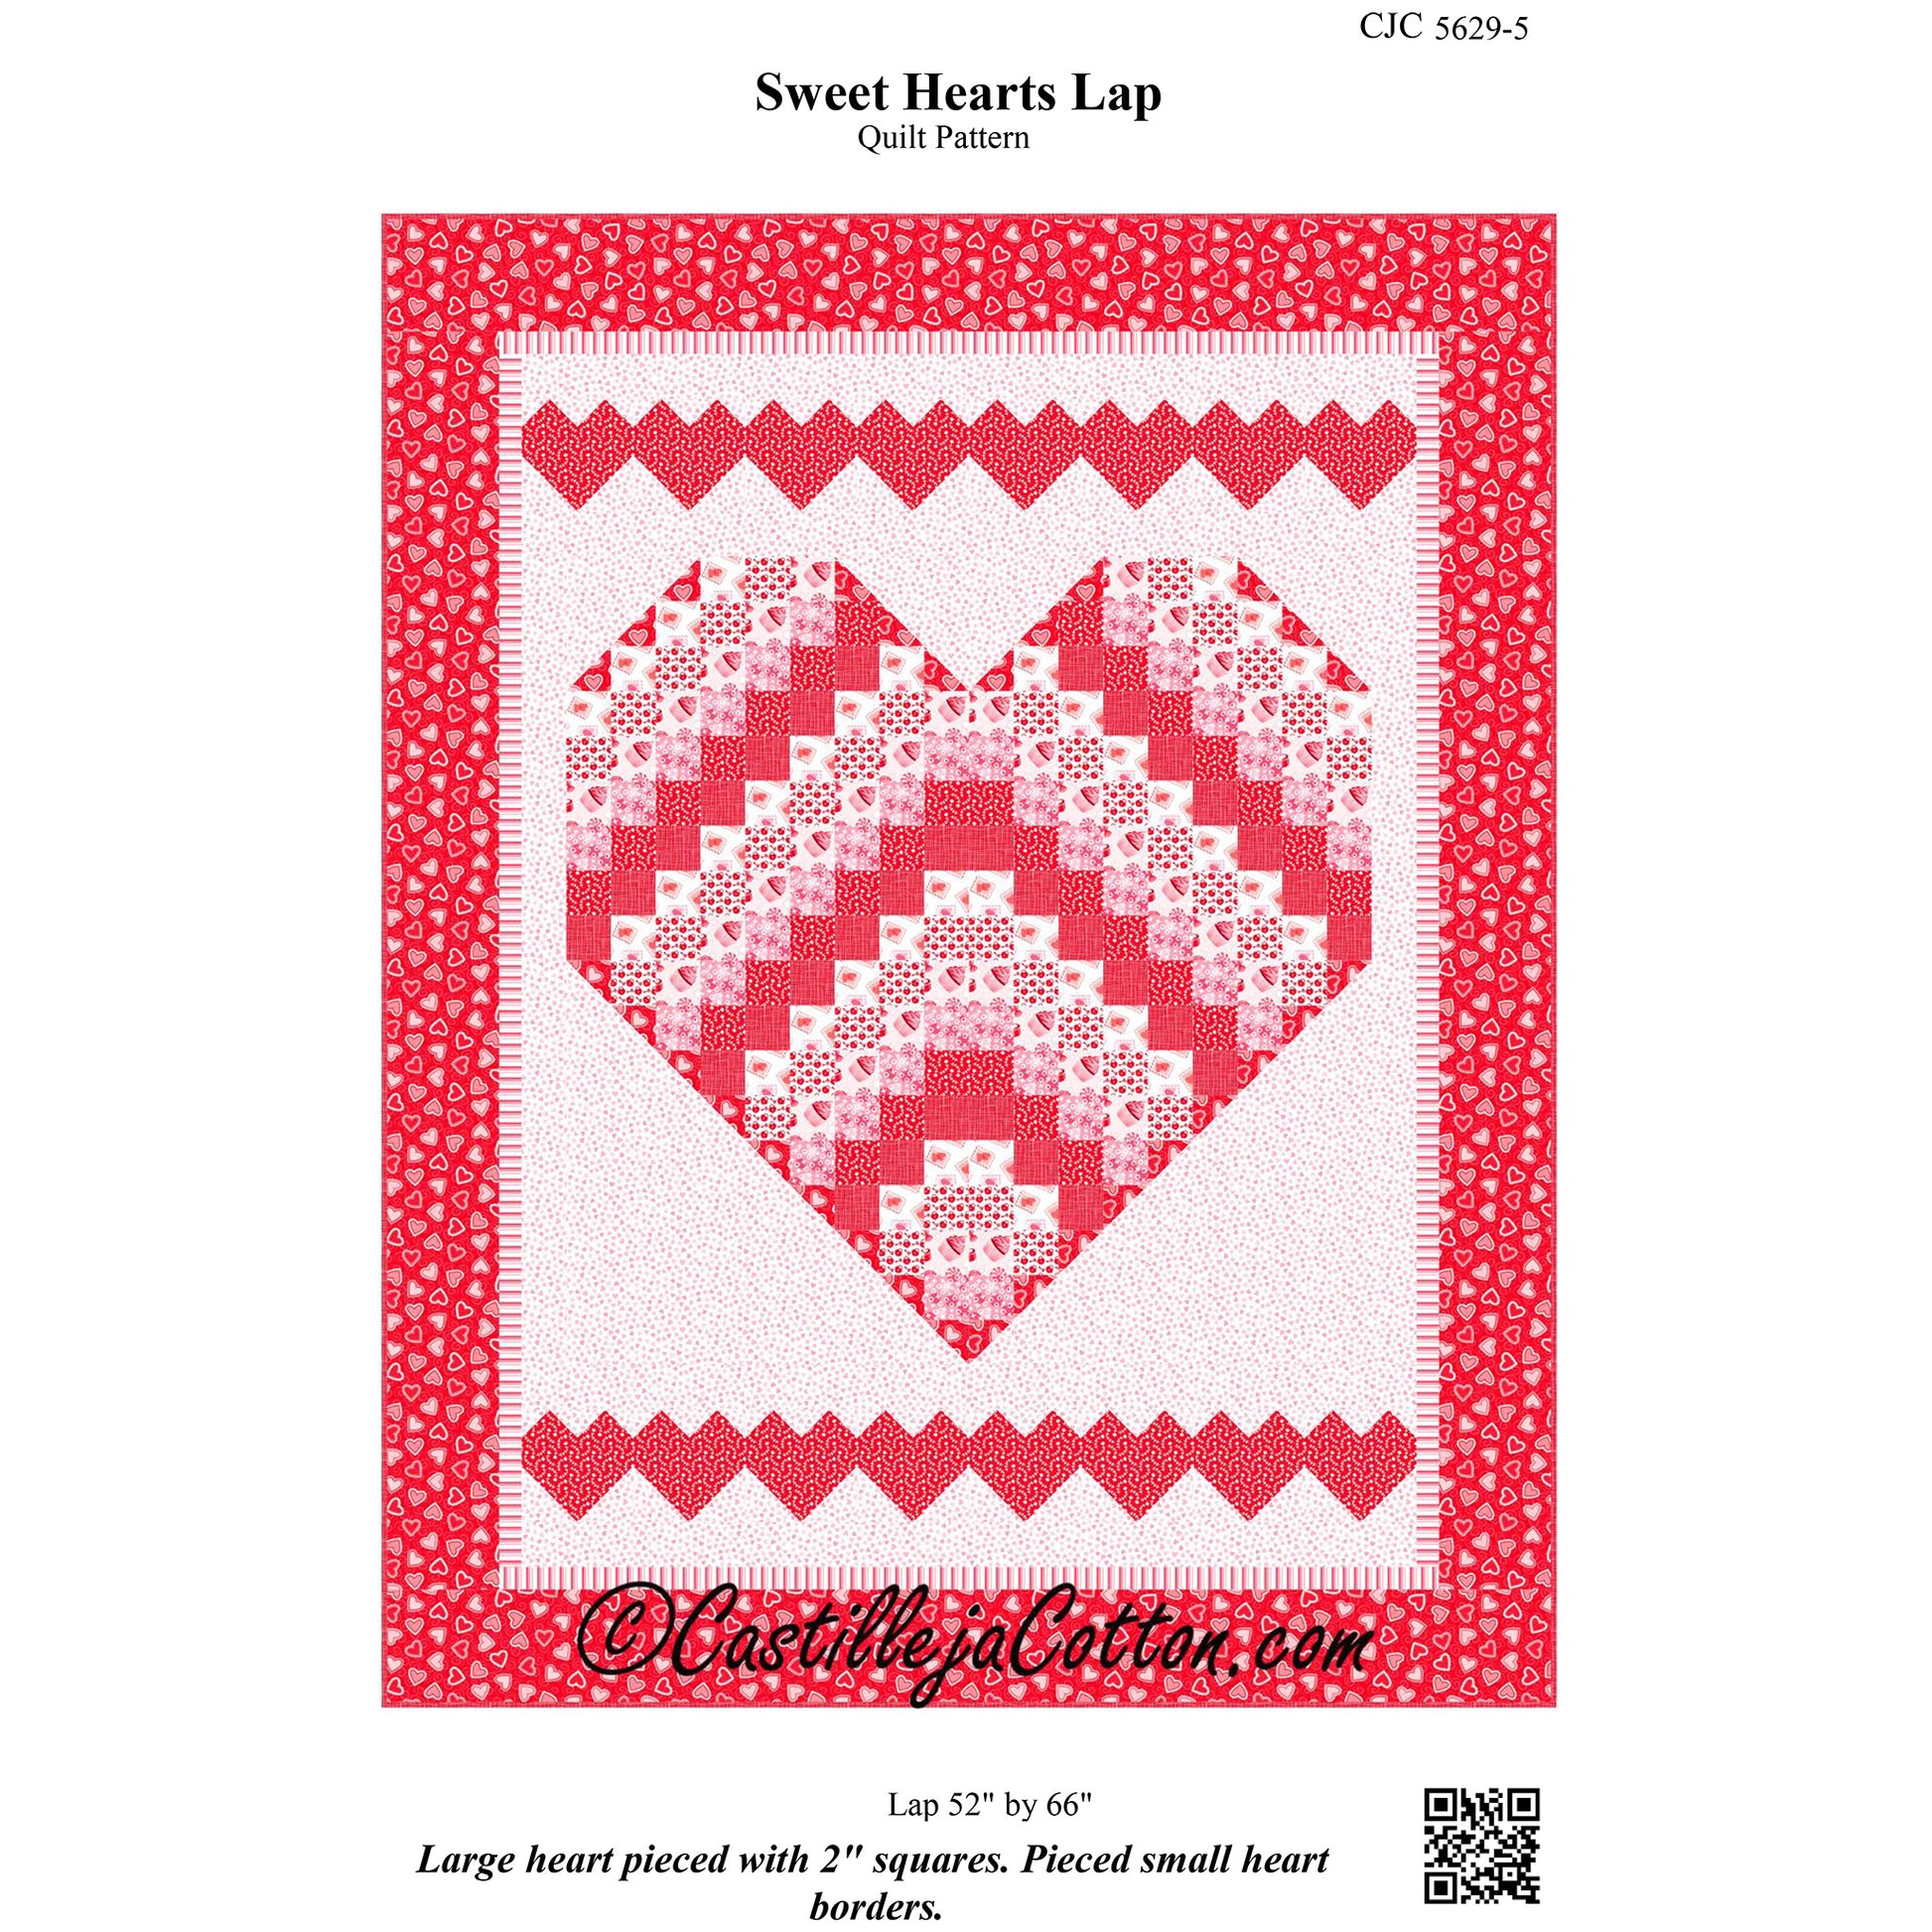 Cover image of pattern for Sweet Hearts Lap Quilt.